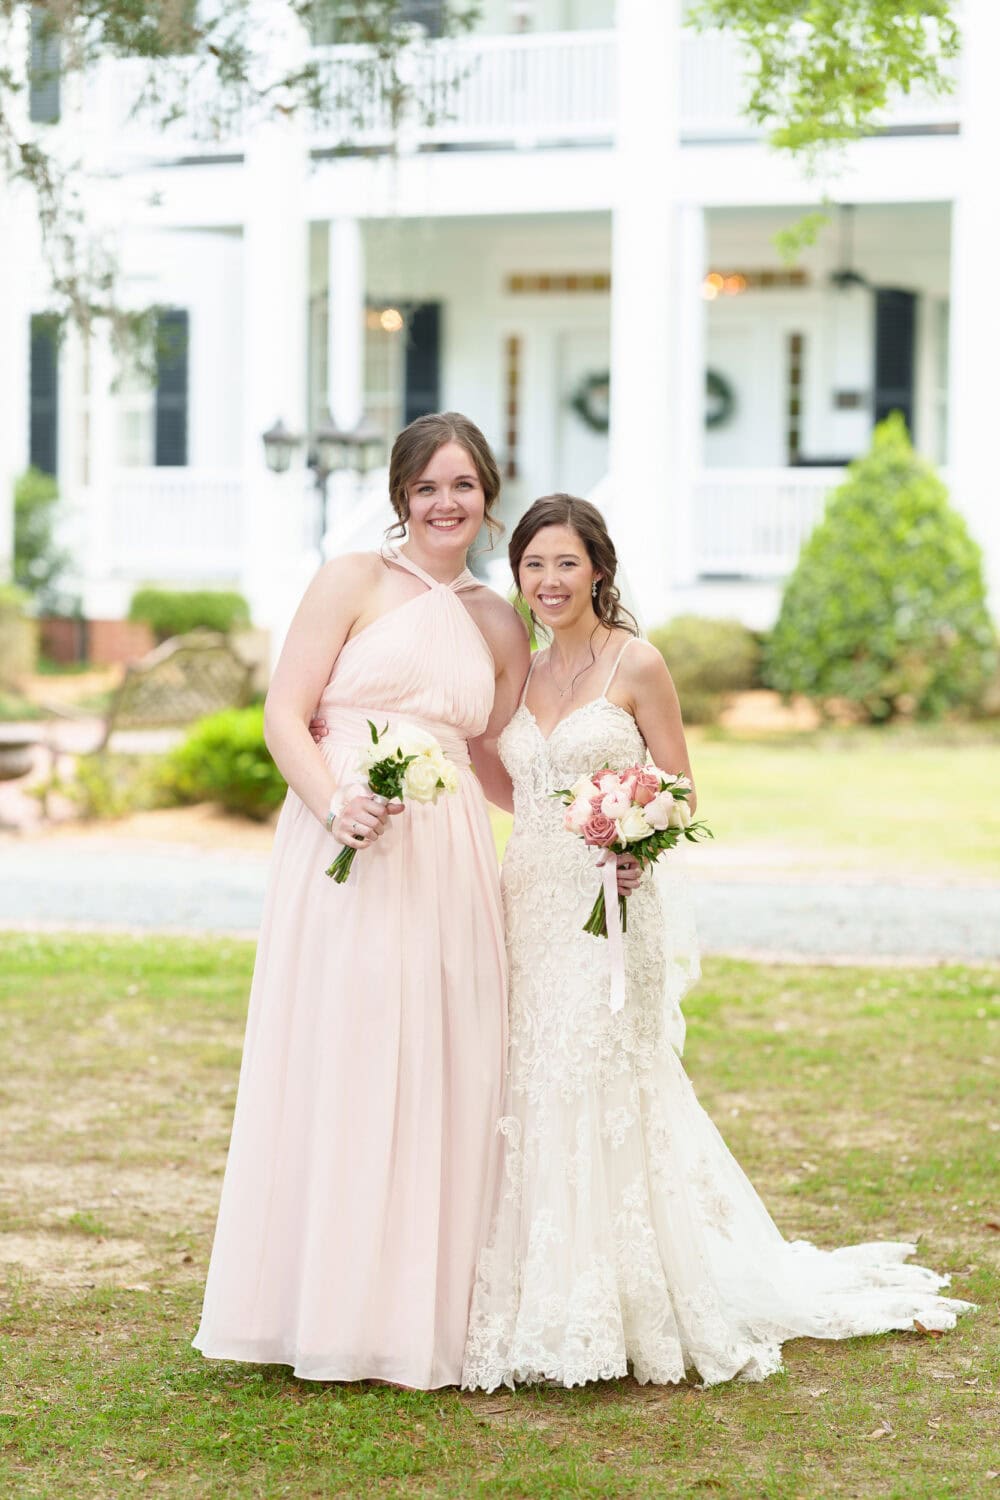 Portraits of the bride and bridesmaids in front of the house - Tanglewood Plantation